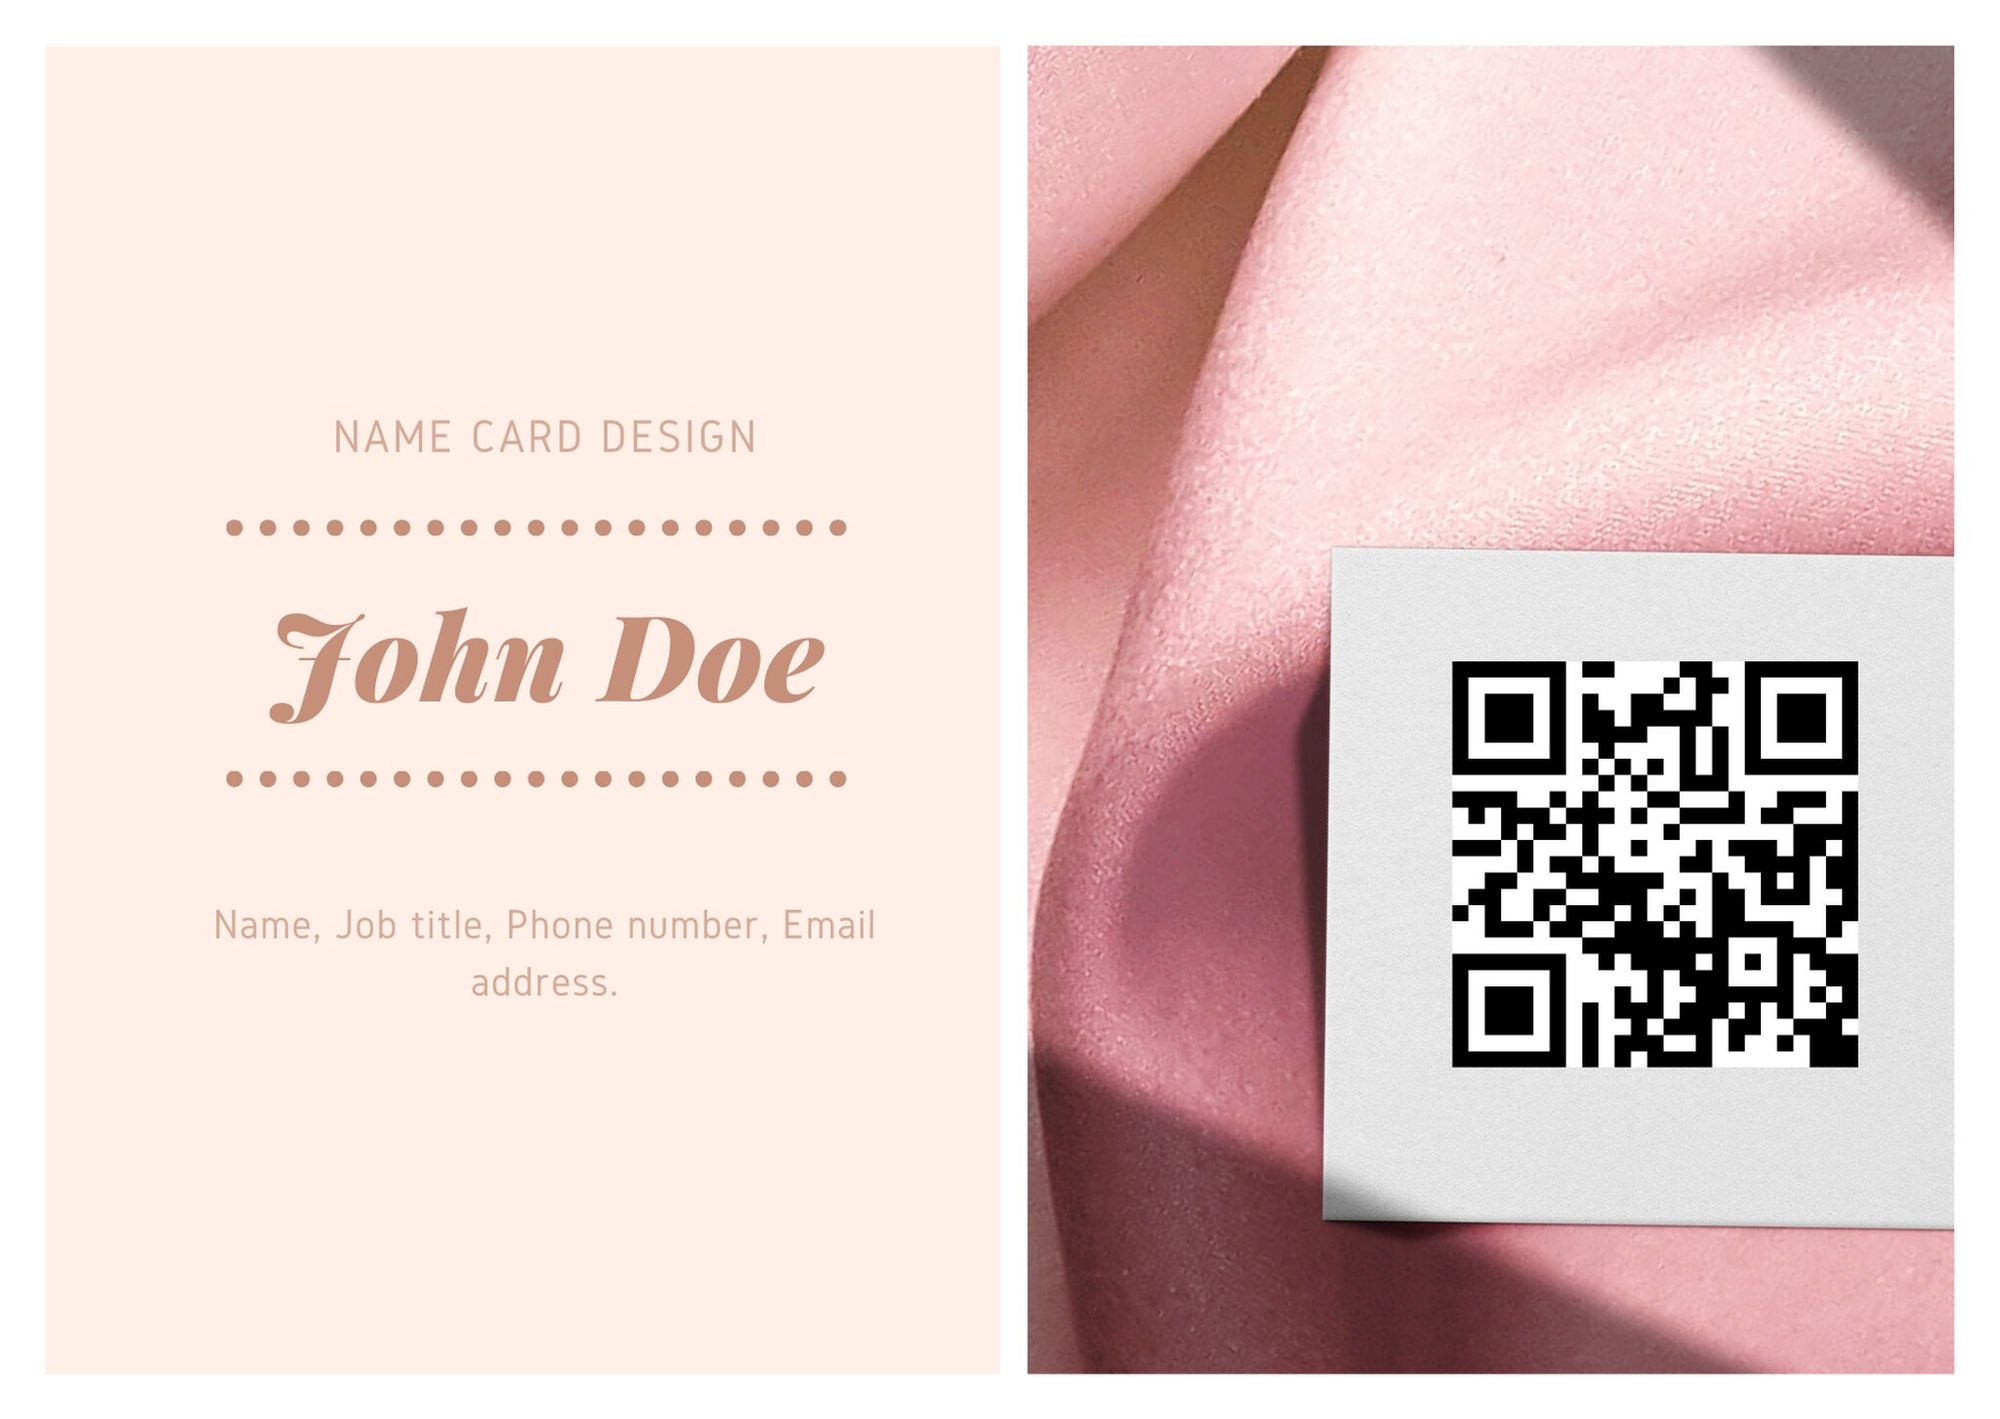 folded name card template that says name card design and includes a QR code